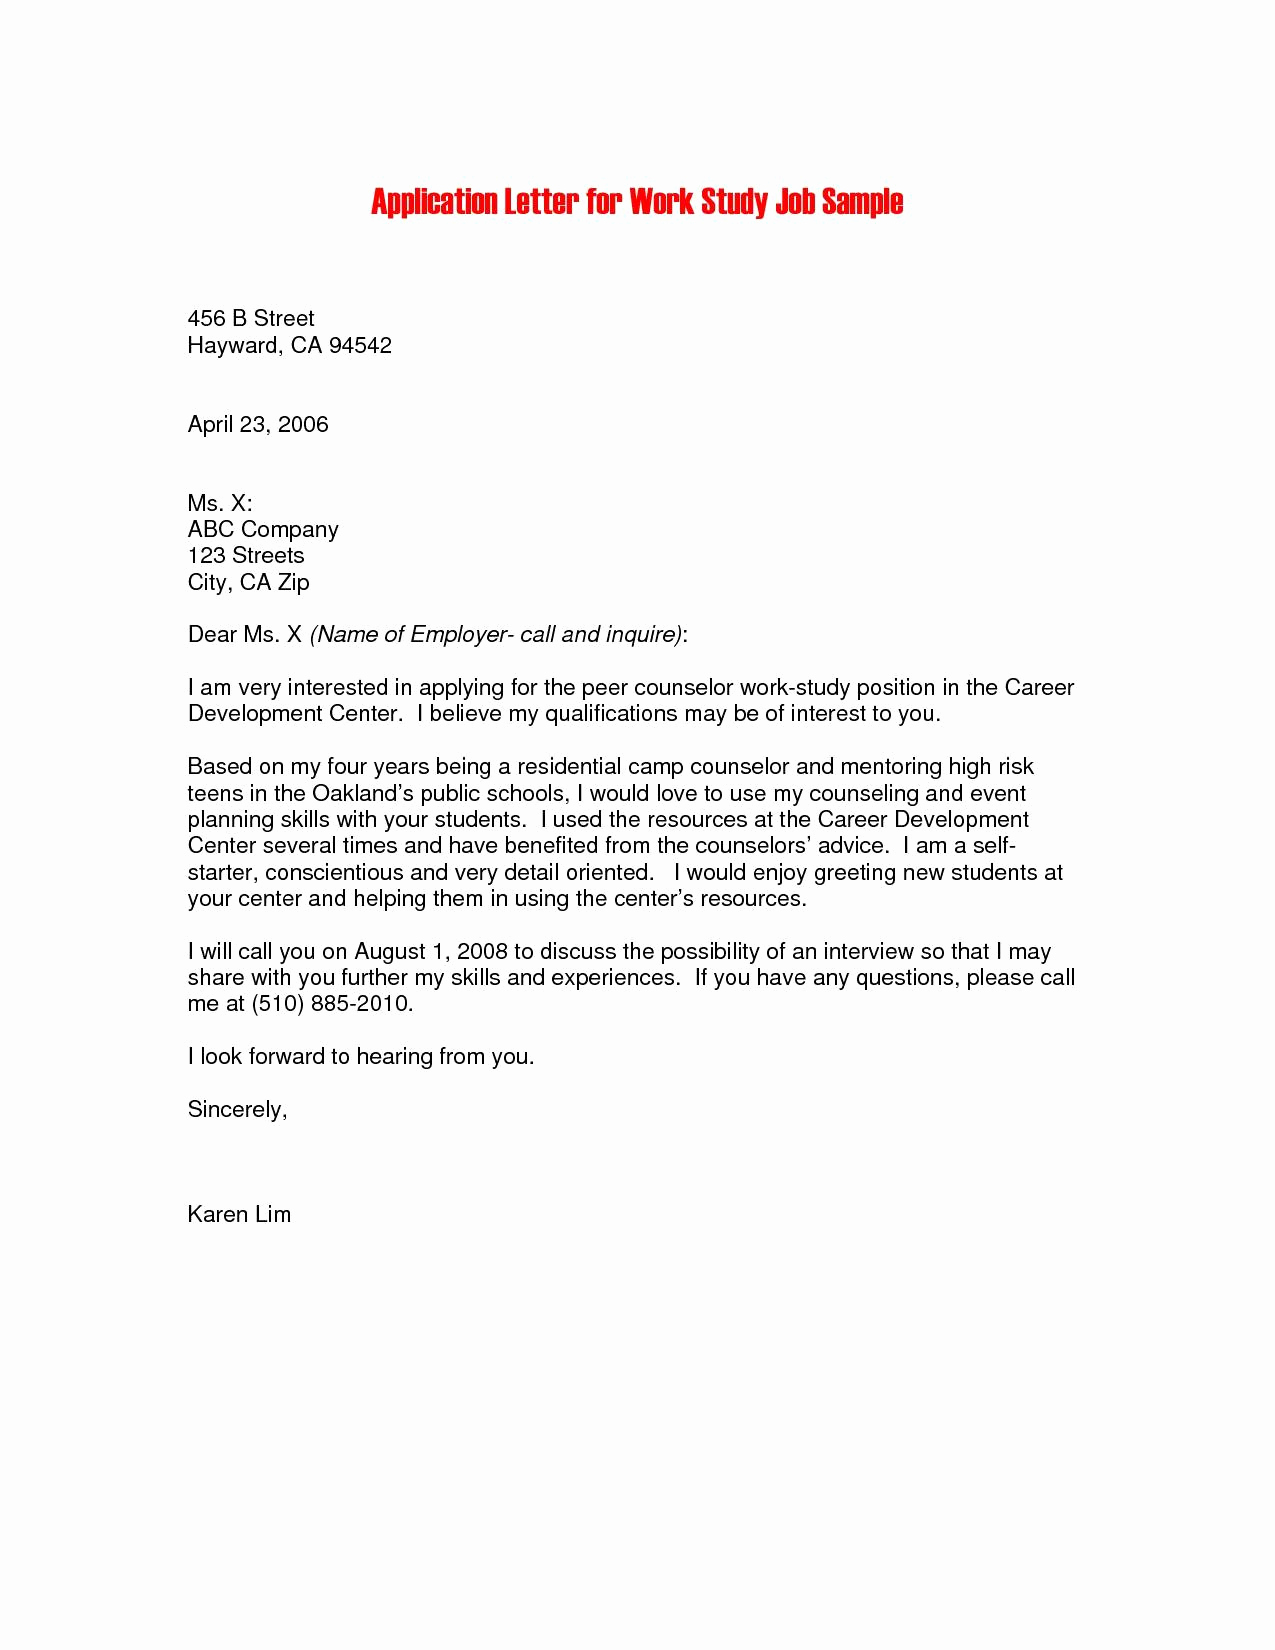 Paralegal Cover Letter Template Collection | Letter ...